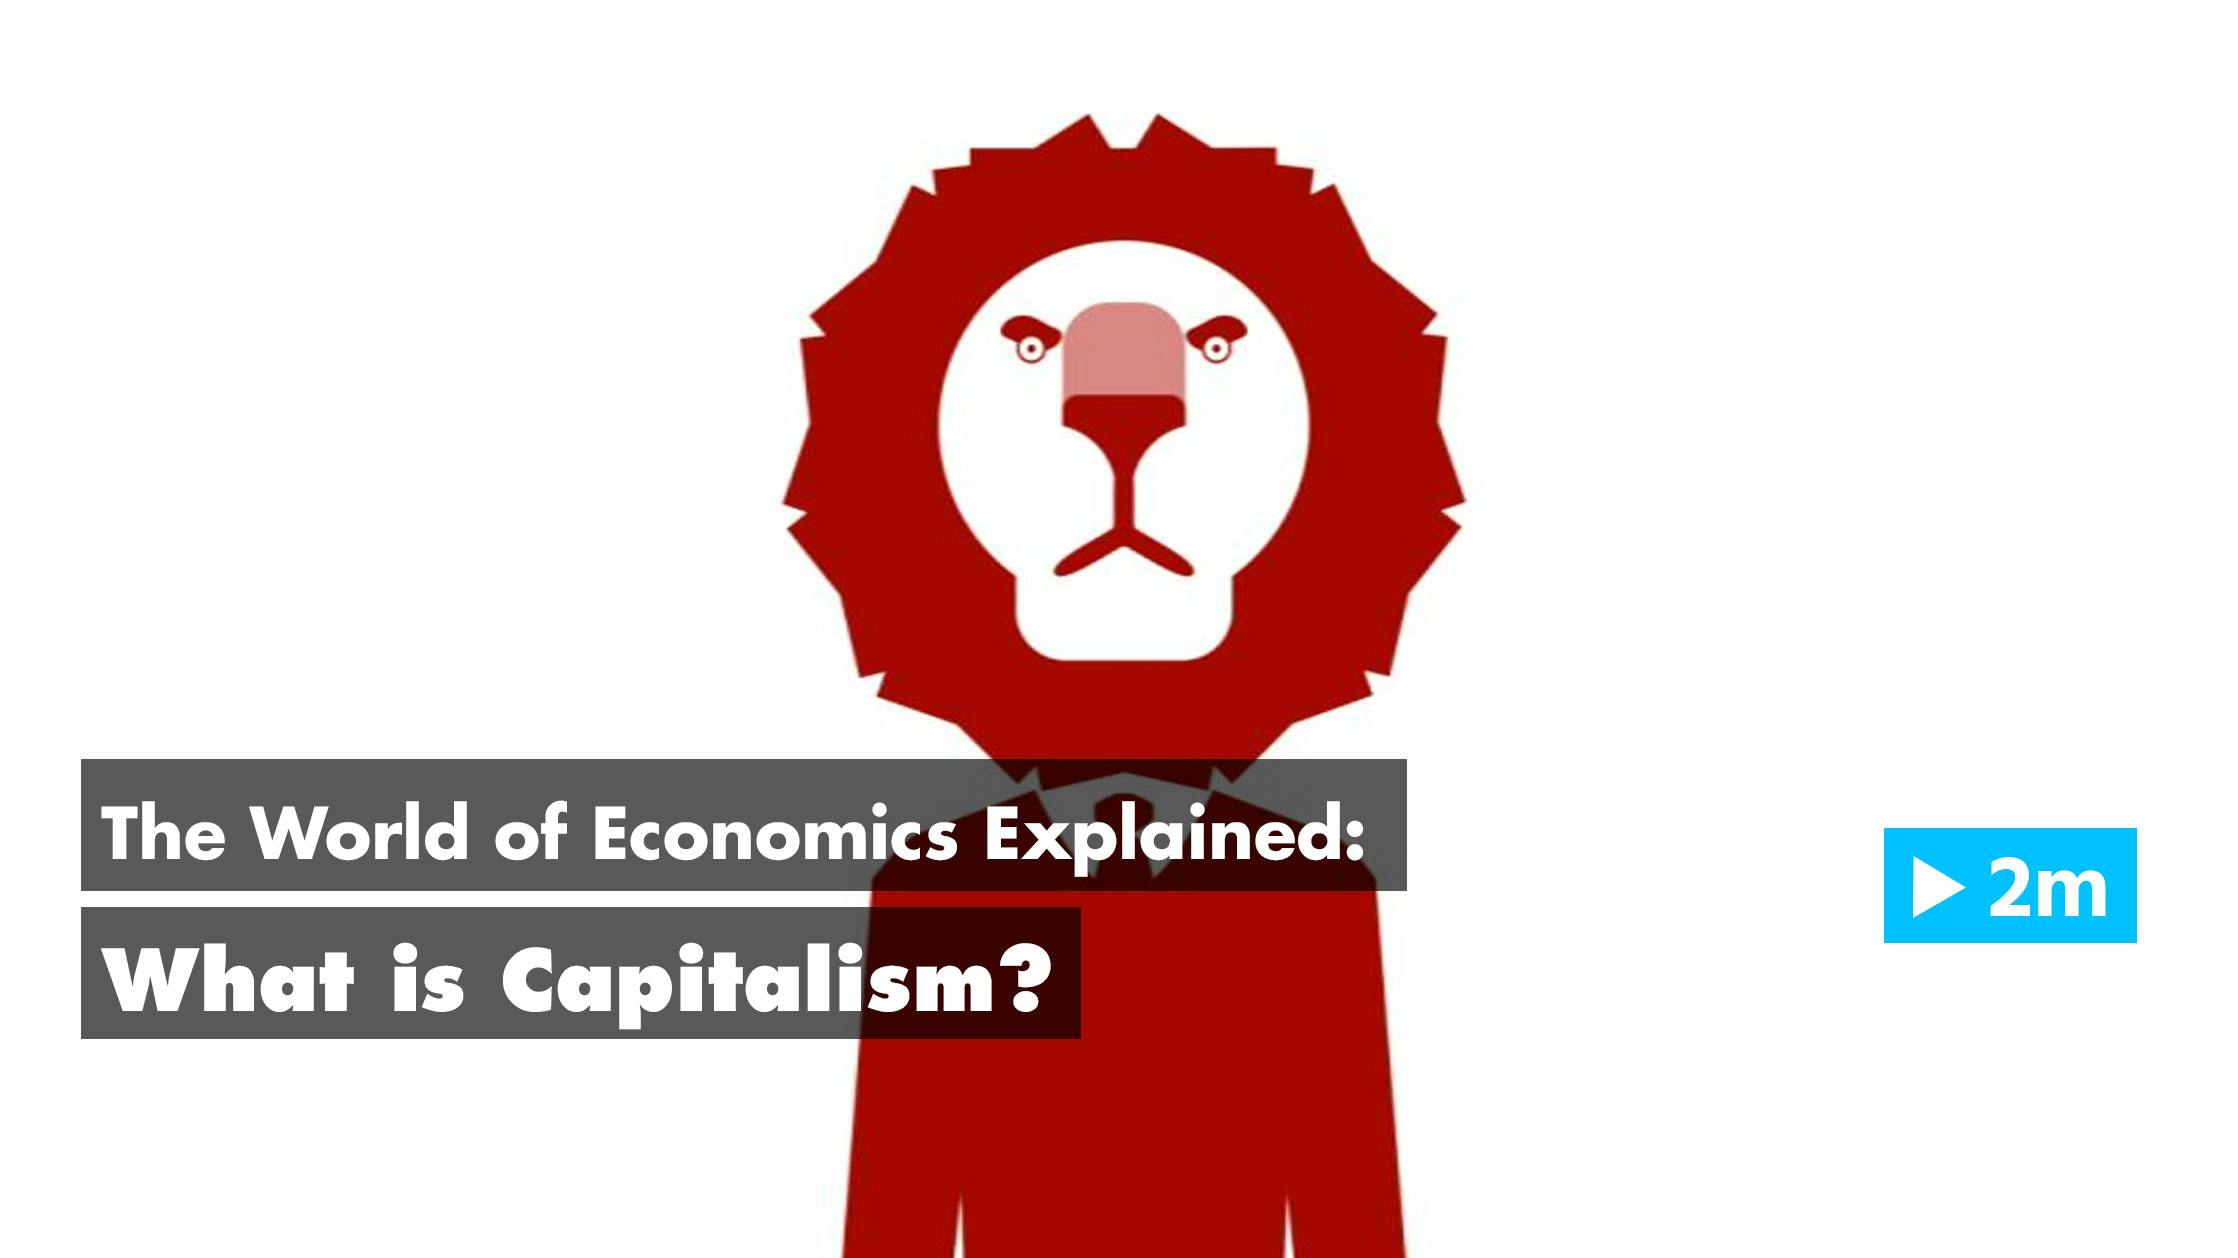 The World of Economics Explained: What is Capitalism?